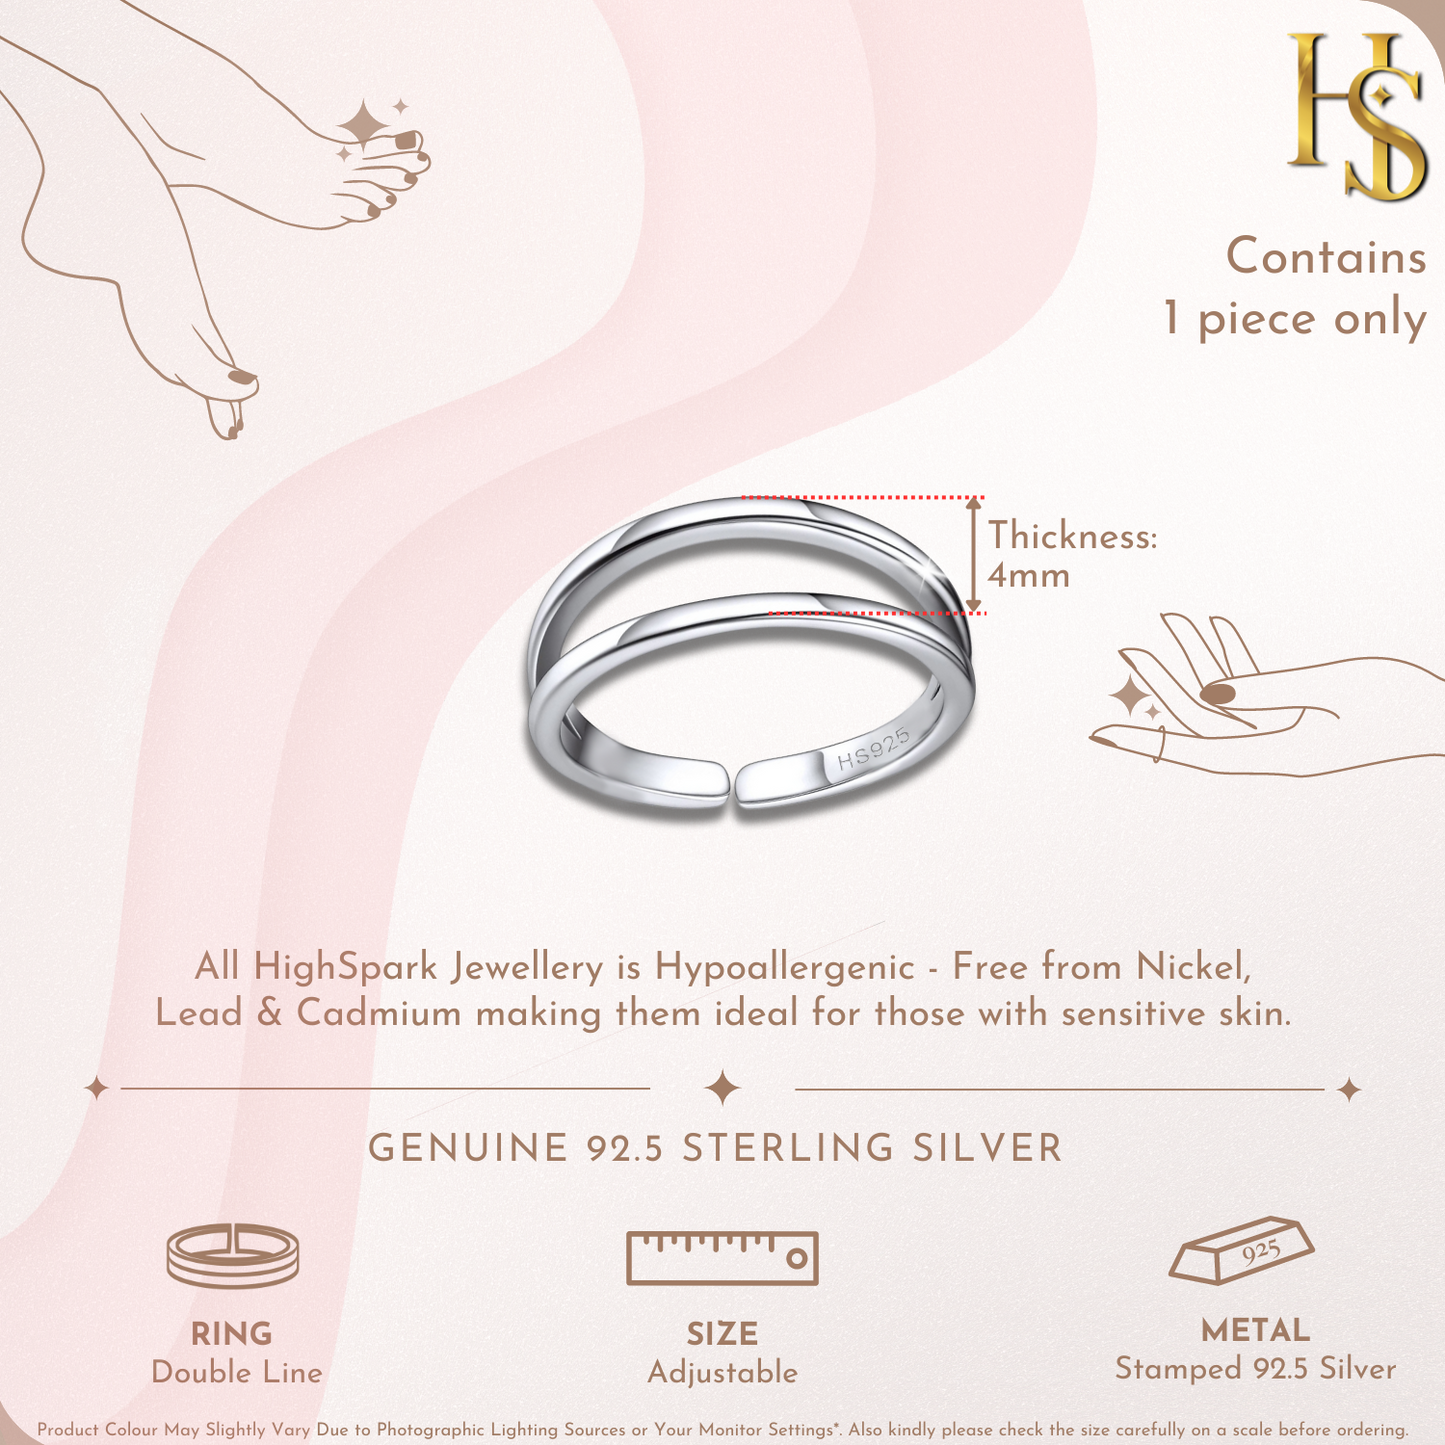 Classic Double Band Toe Ring - Band Ring - 925 Sterling Silver - 1 Piece